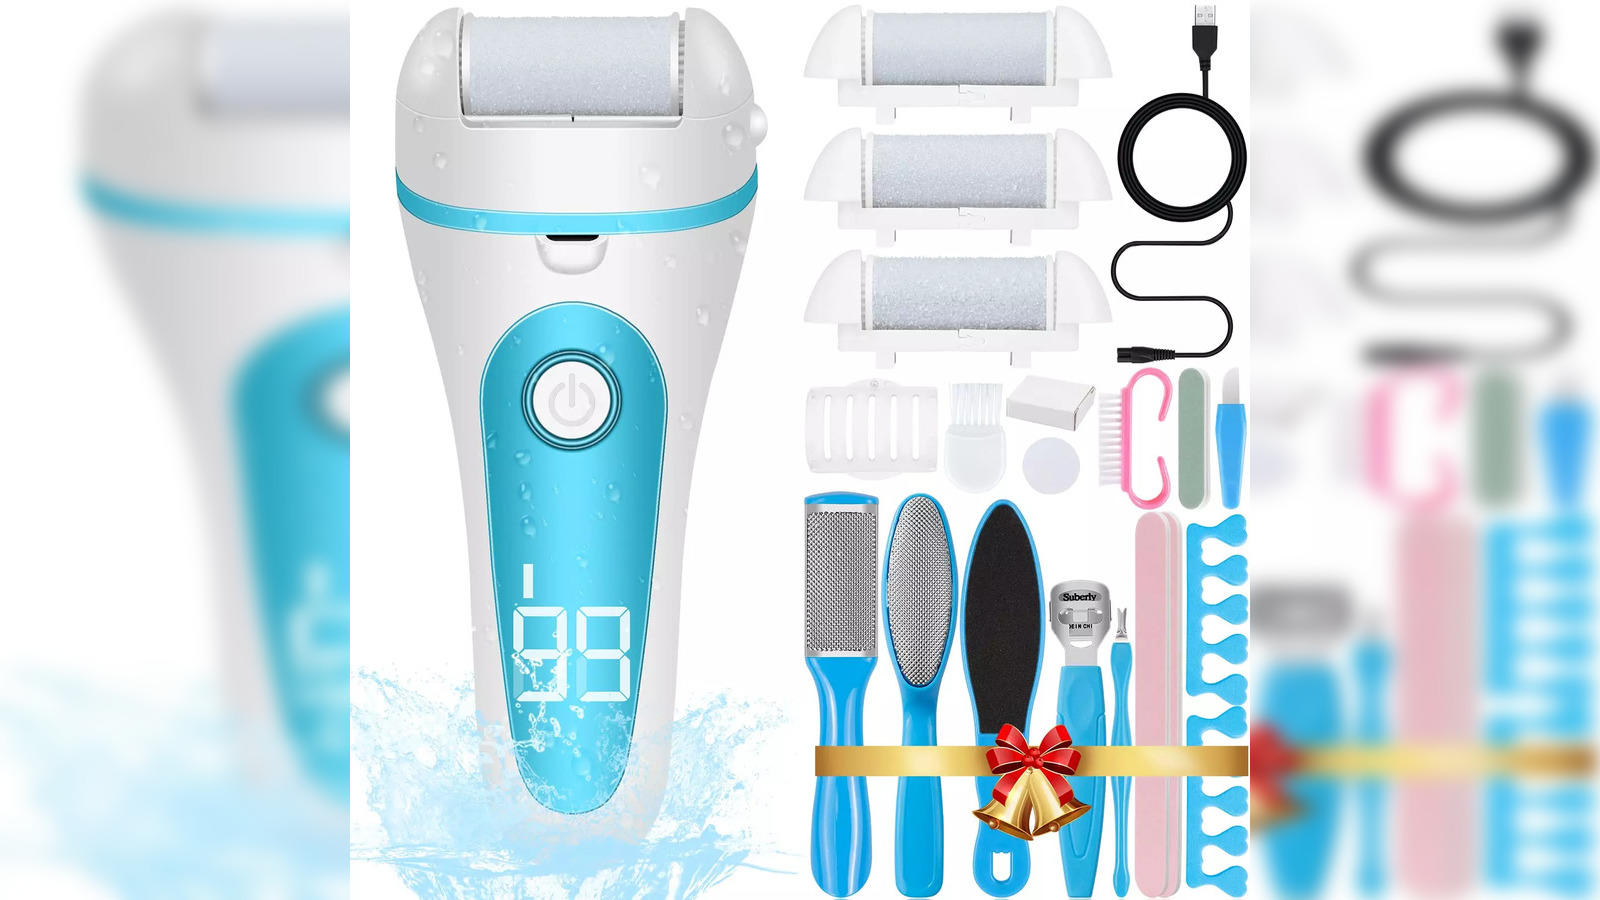 Callus Remover for Women: Best Callus Remover for Women for